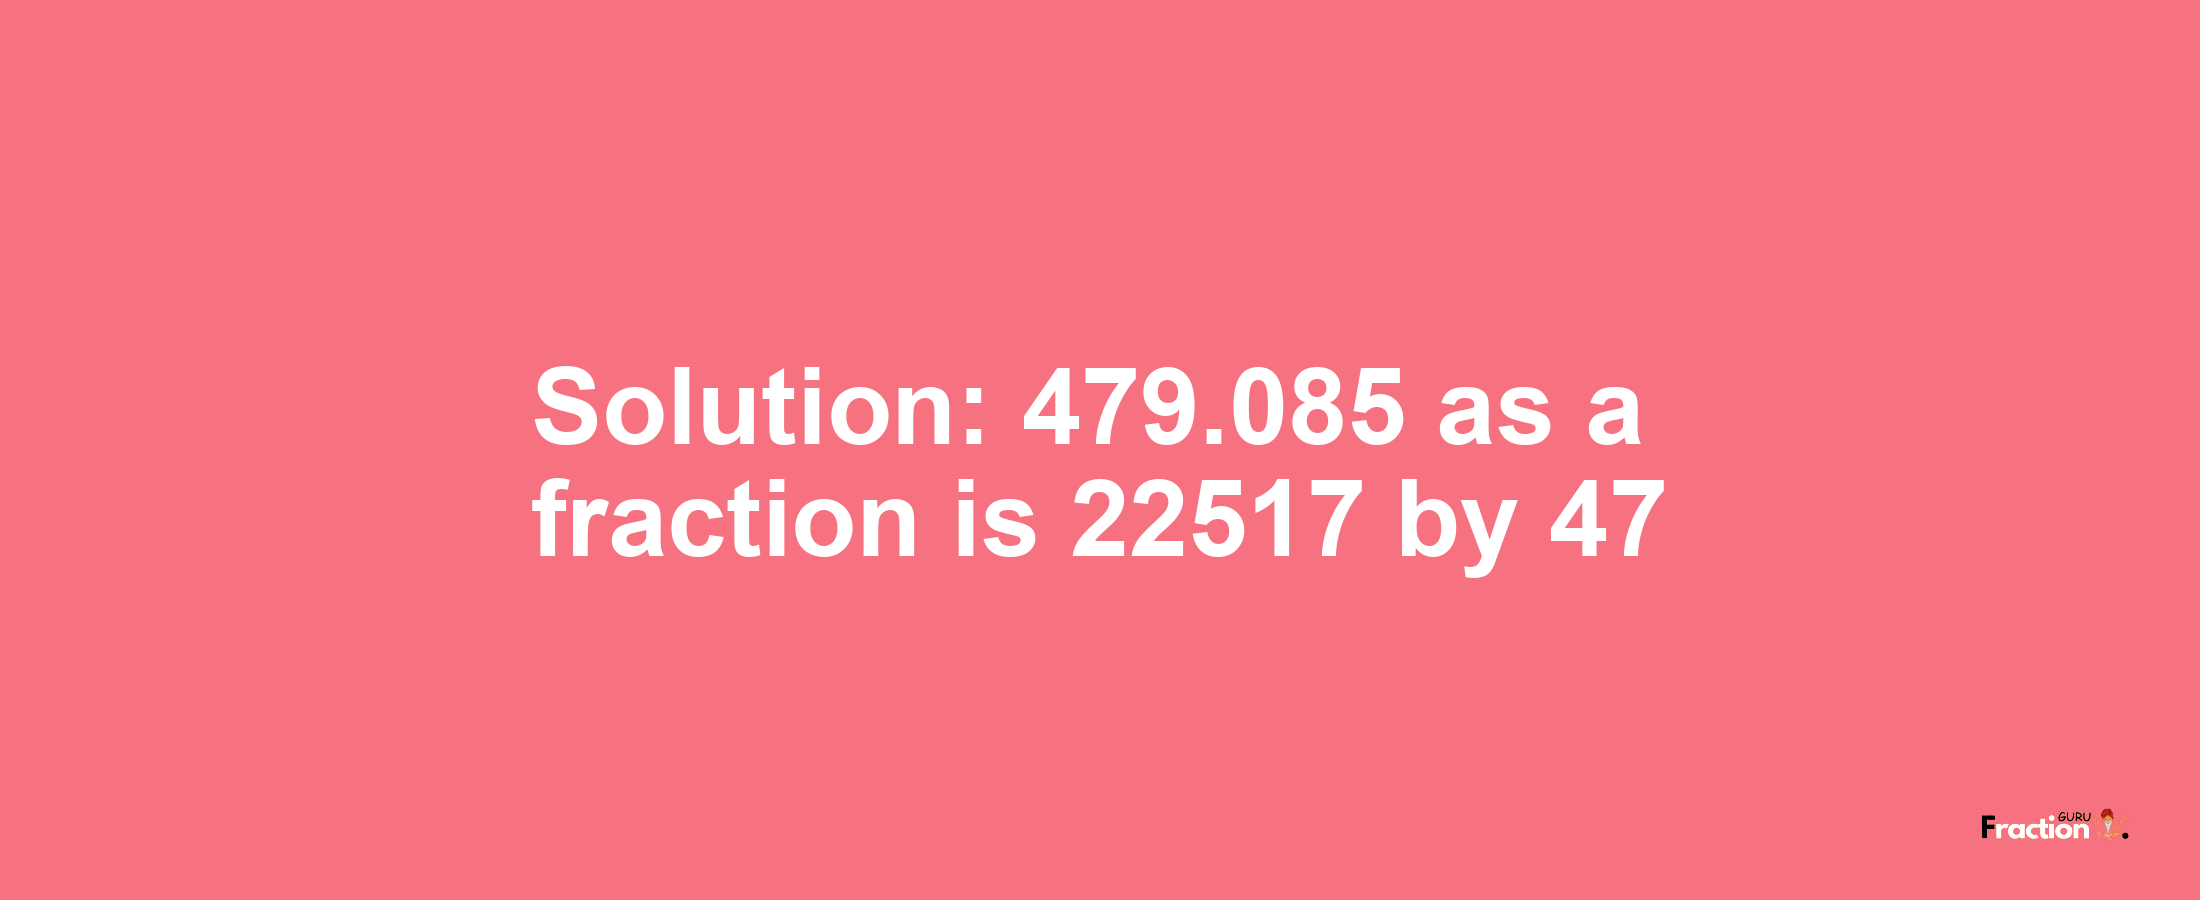 Solution:479.085 as a fraction is 22517/47